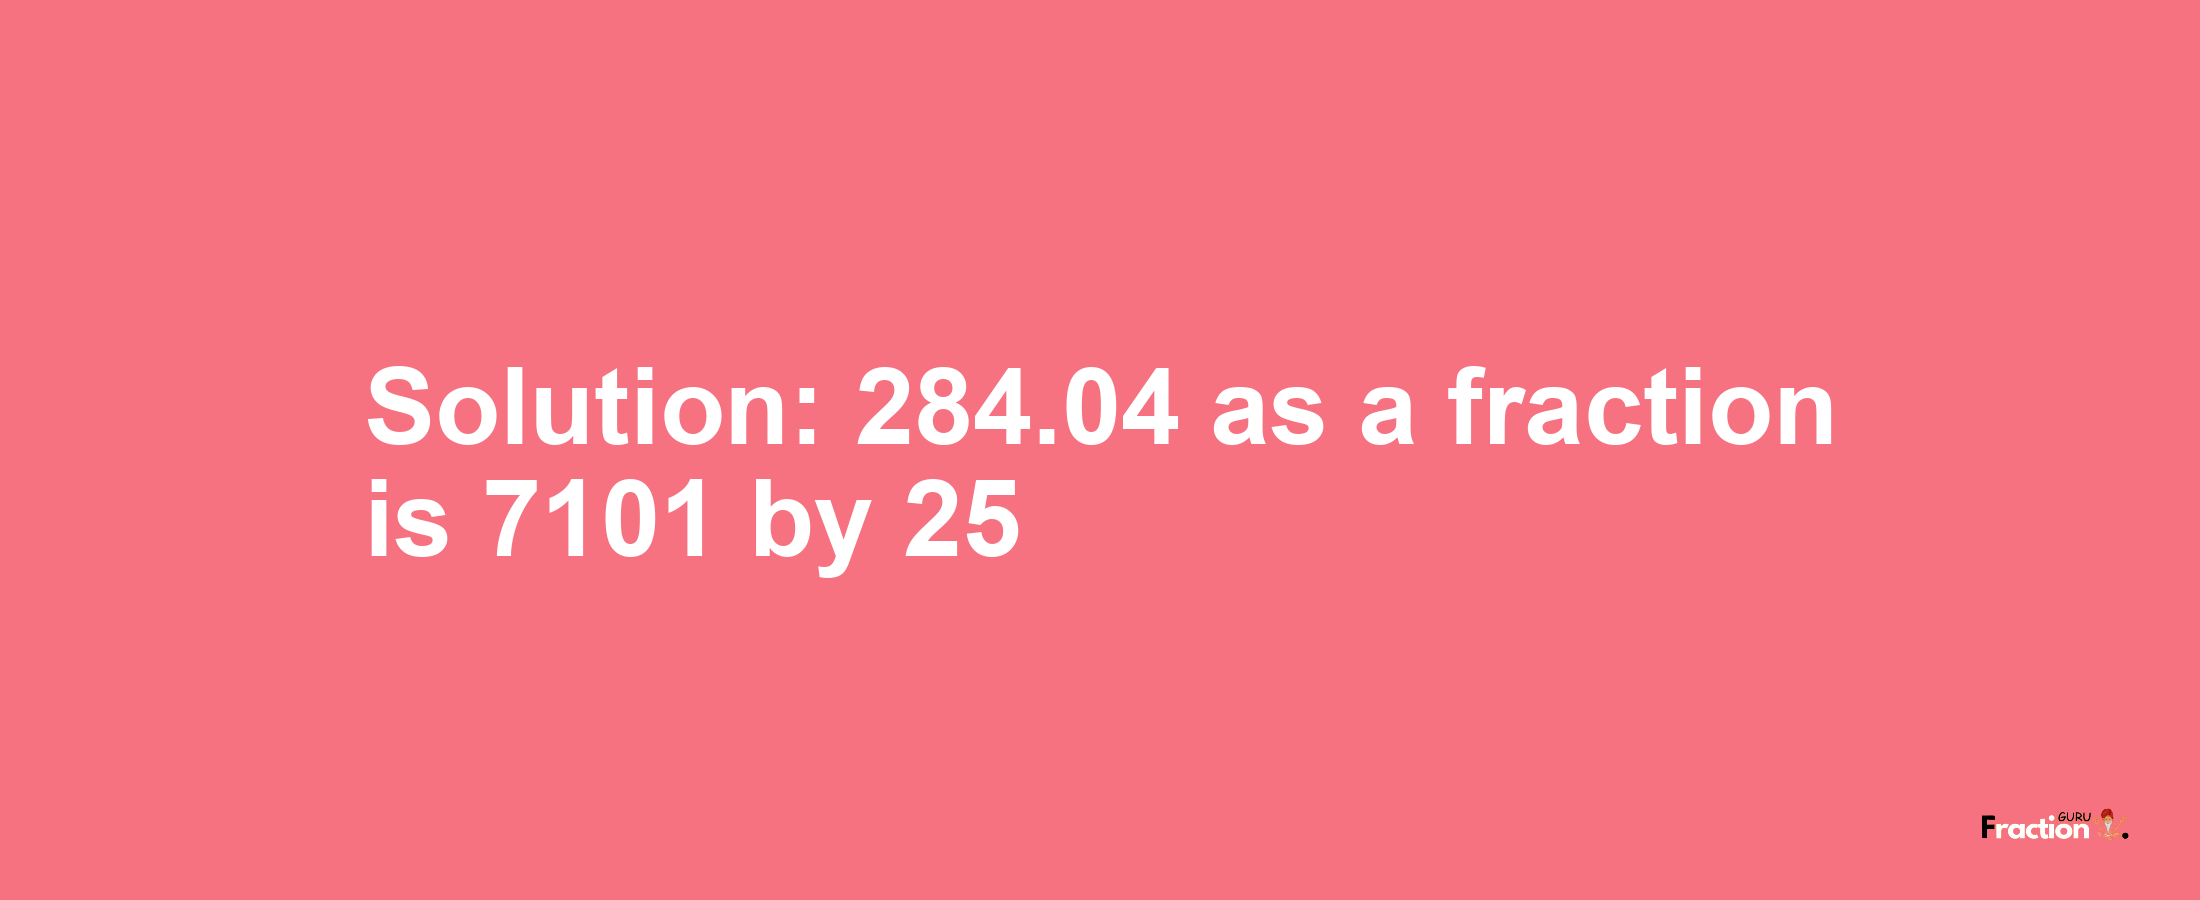 Solution:284.04 as a fraction is 7101/25